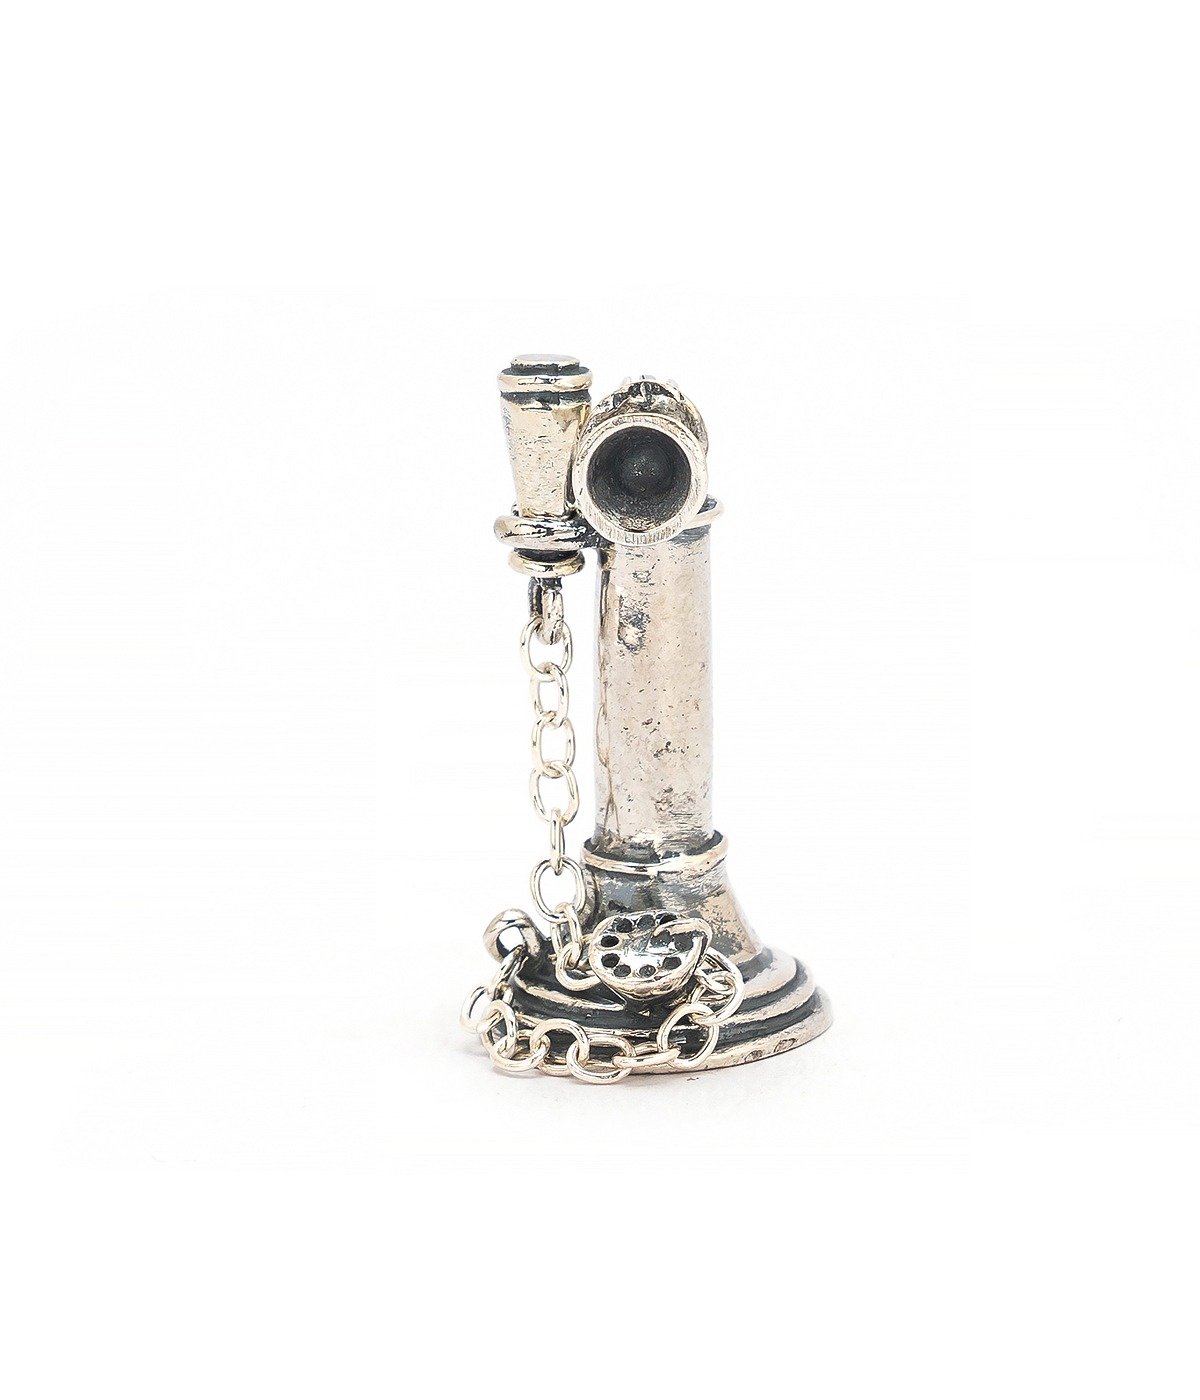 92.5 STERLING SILVER  MINIATURE ṬELEPHONE CHARM FOR GIFT